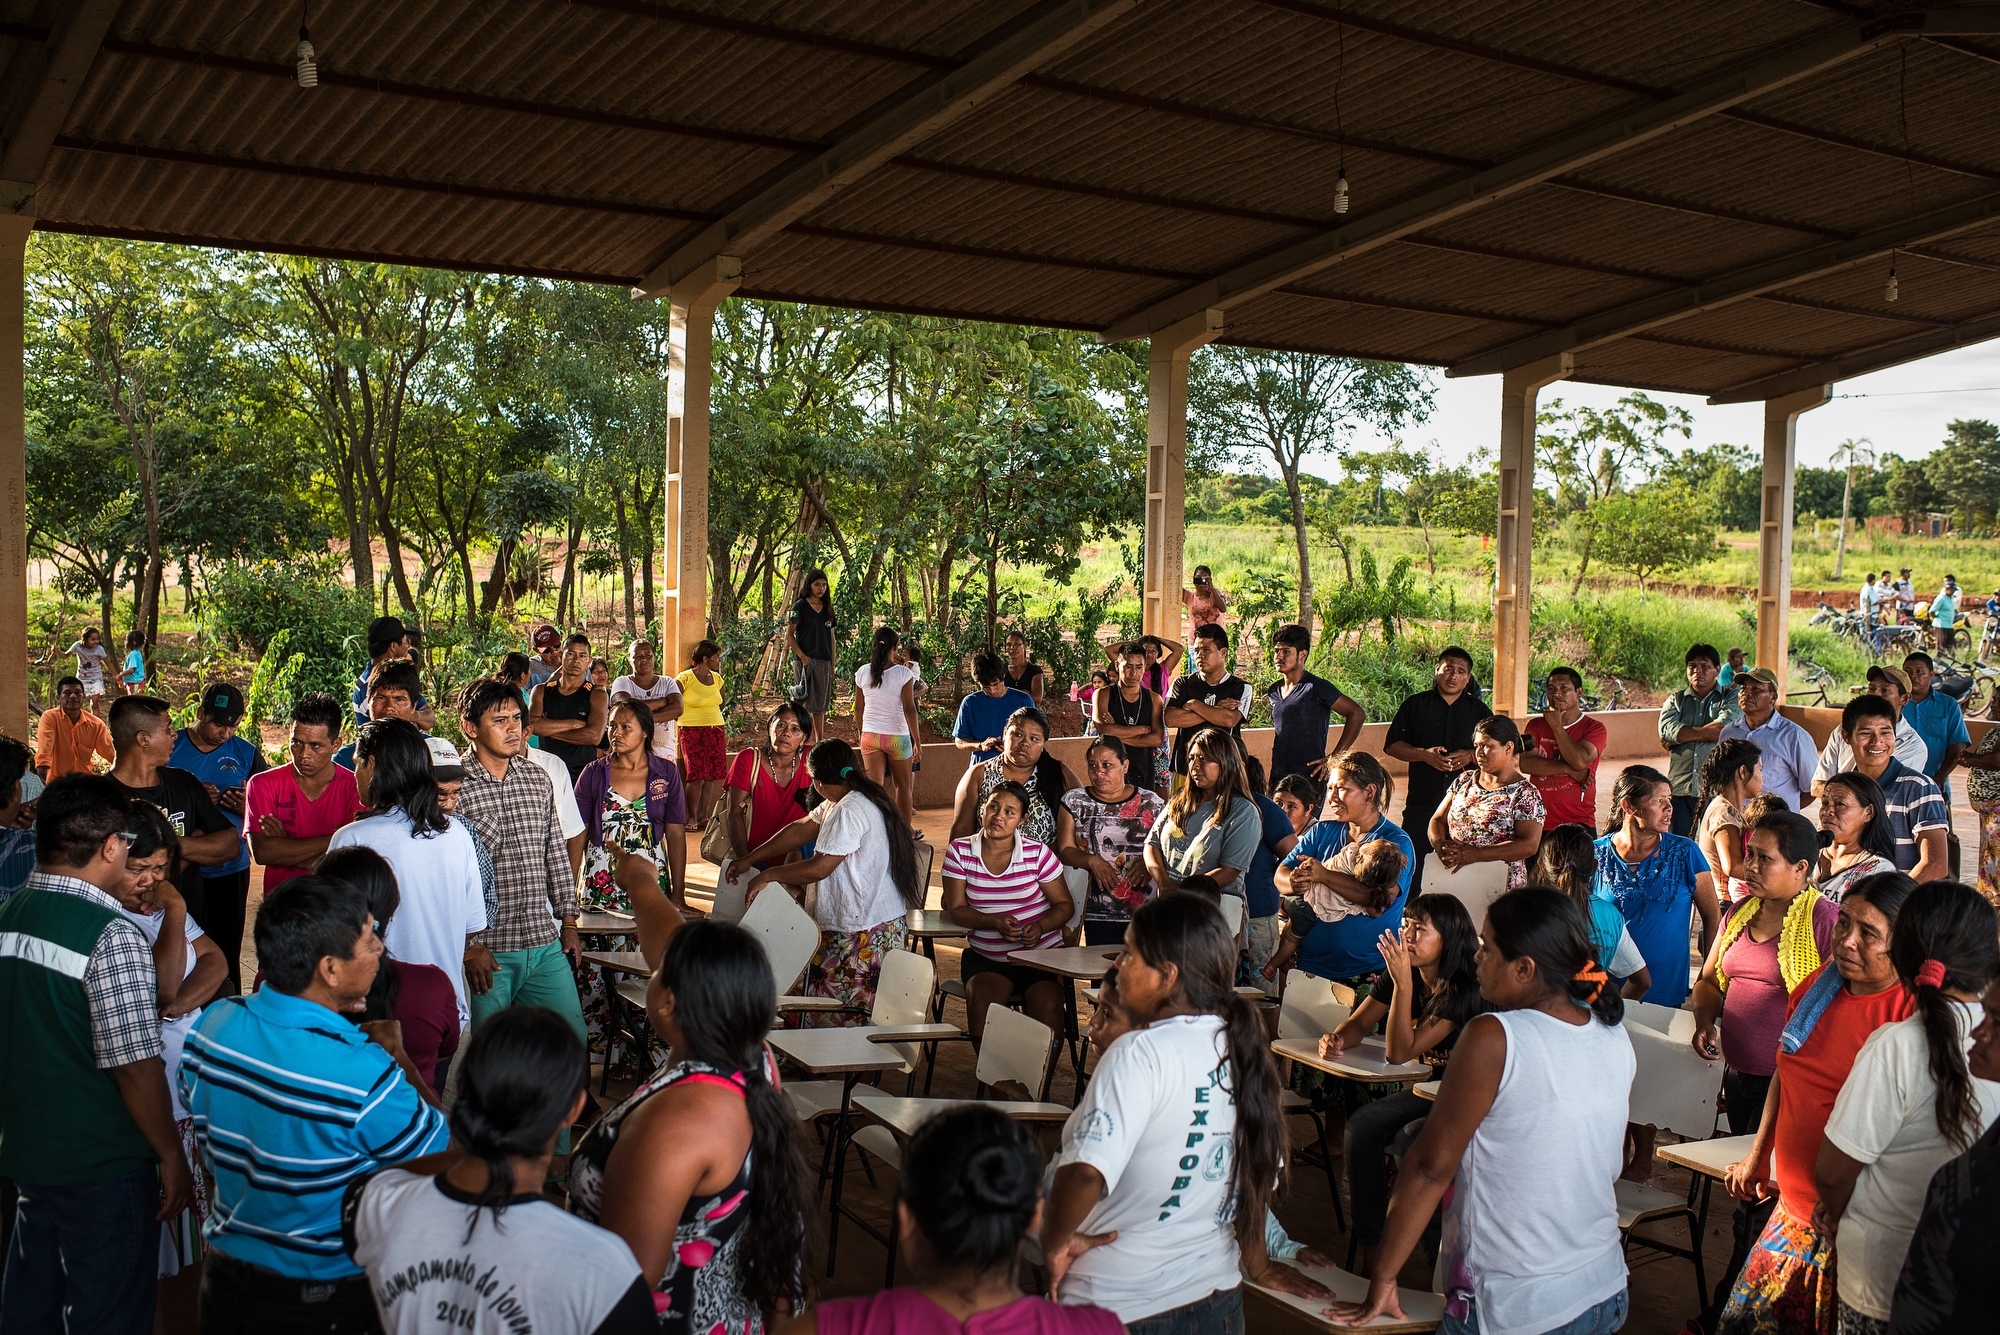 November 29, 2016.&nbsp; Residents meet to discuss whether they should block the road in protest to the fact that they haven&#39;t had water for three months after a well pump broke in the Guarani-Kaiowa Amambai Indigenous Reserve in Matto Grosso Du Sul, Brazil.